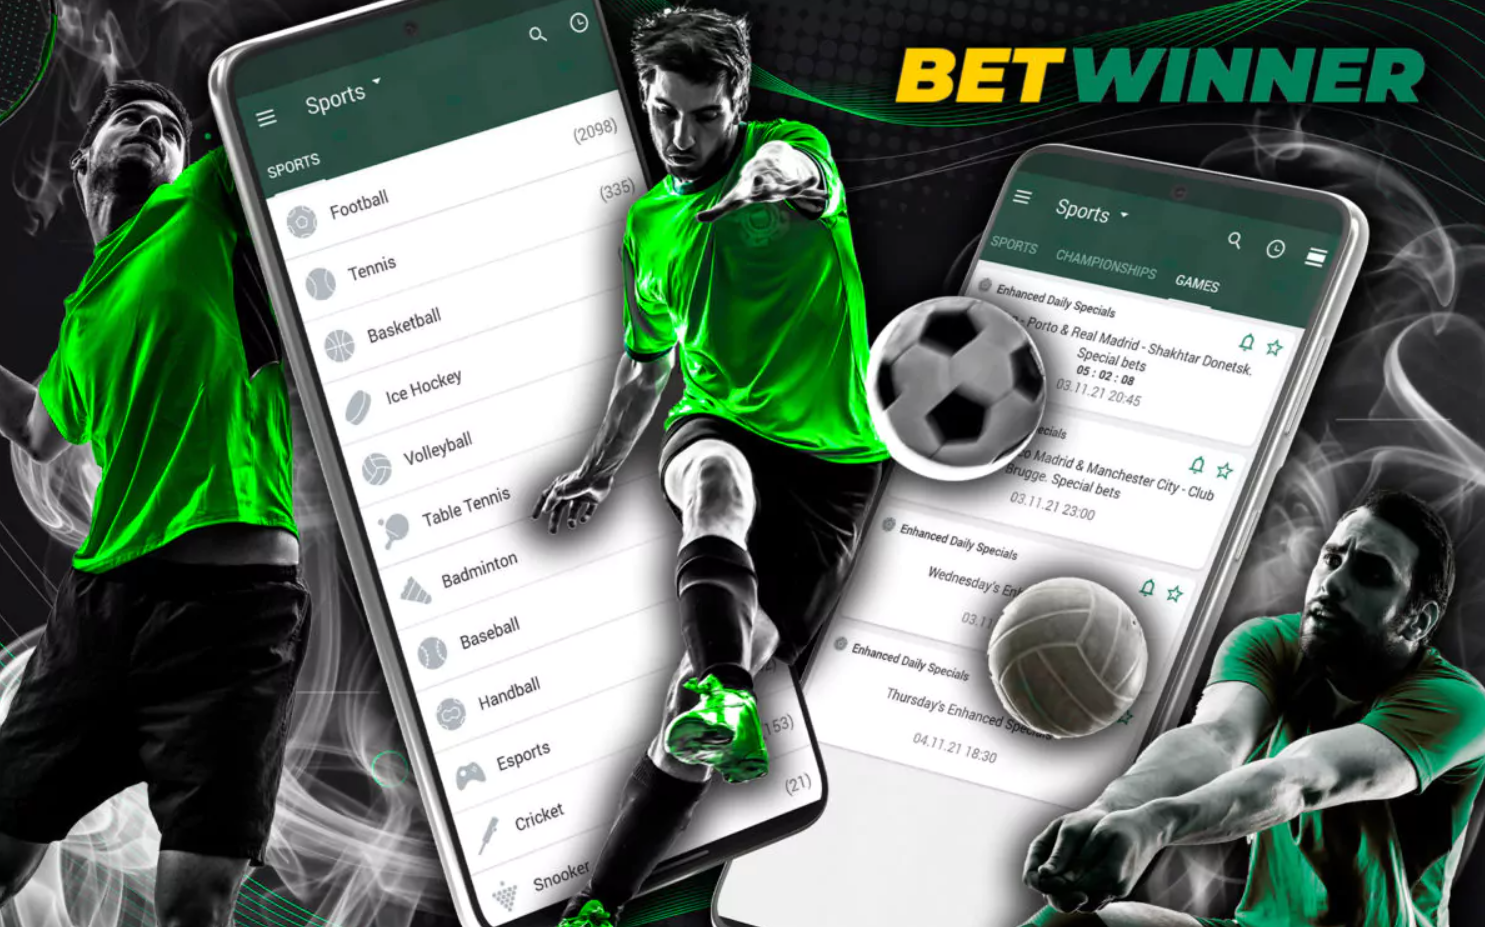 How to download and to use Betwinner APK?